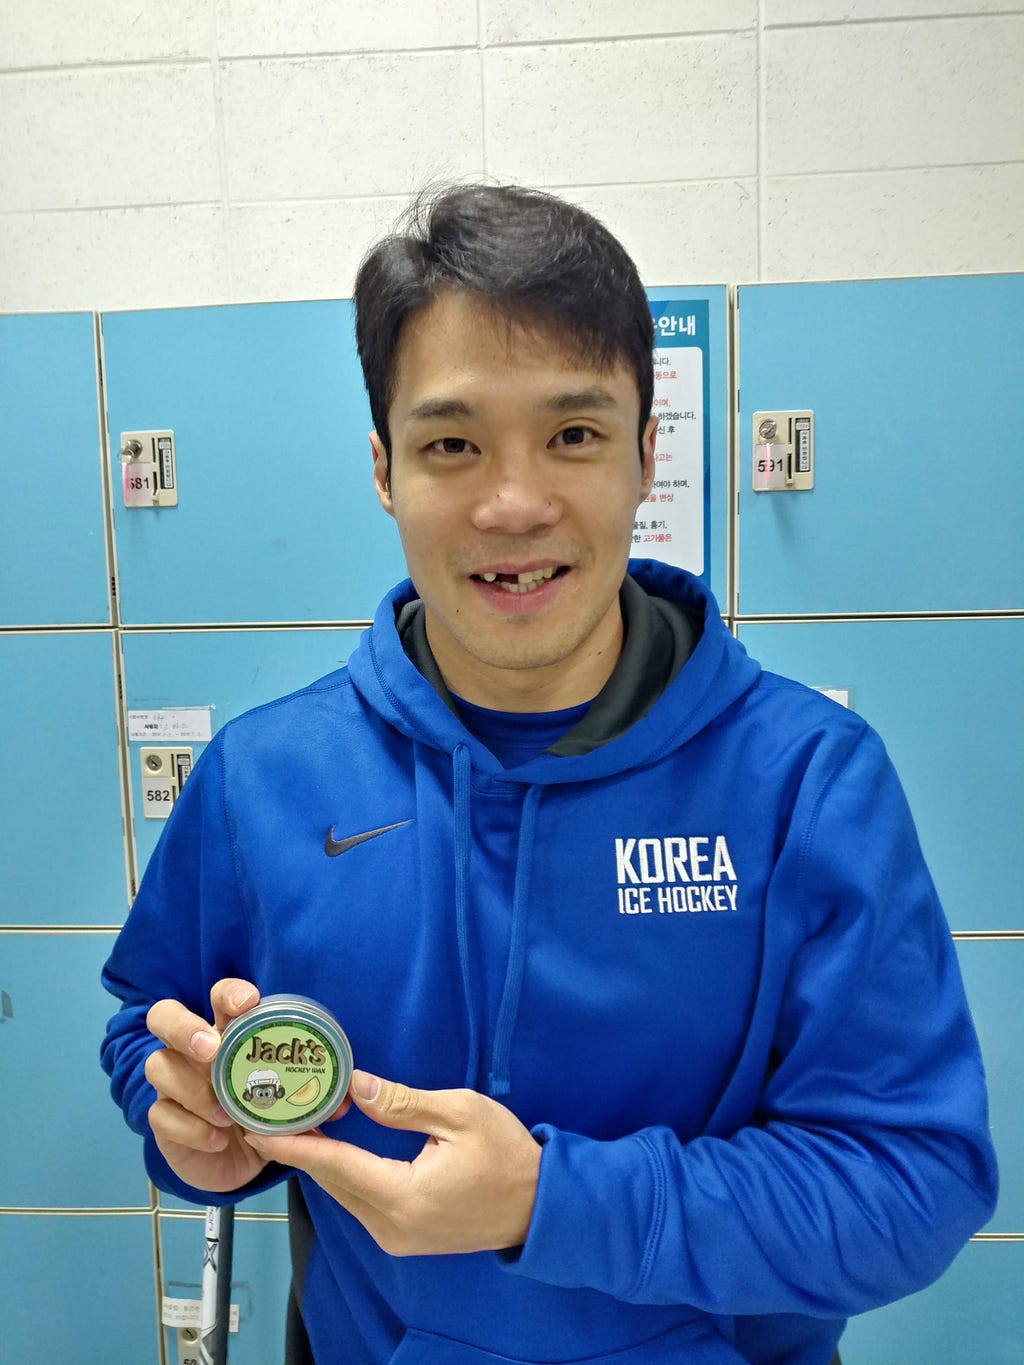 Korean ice hockey player Cho Minho holds a tin of Jack’s Hockey Wax while smiling in front of a wall of lockers.